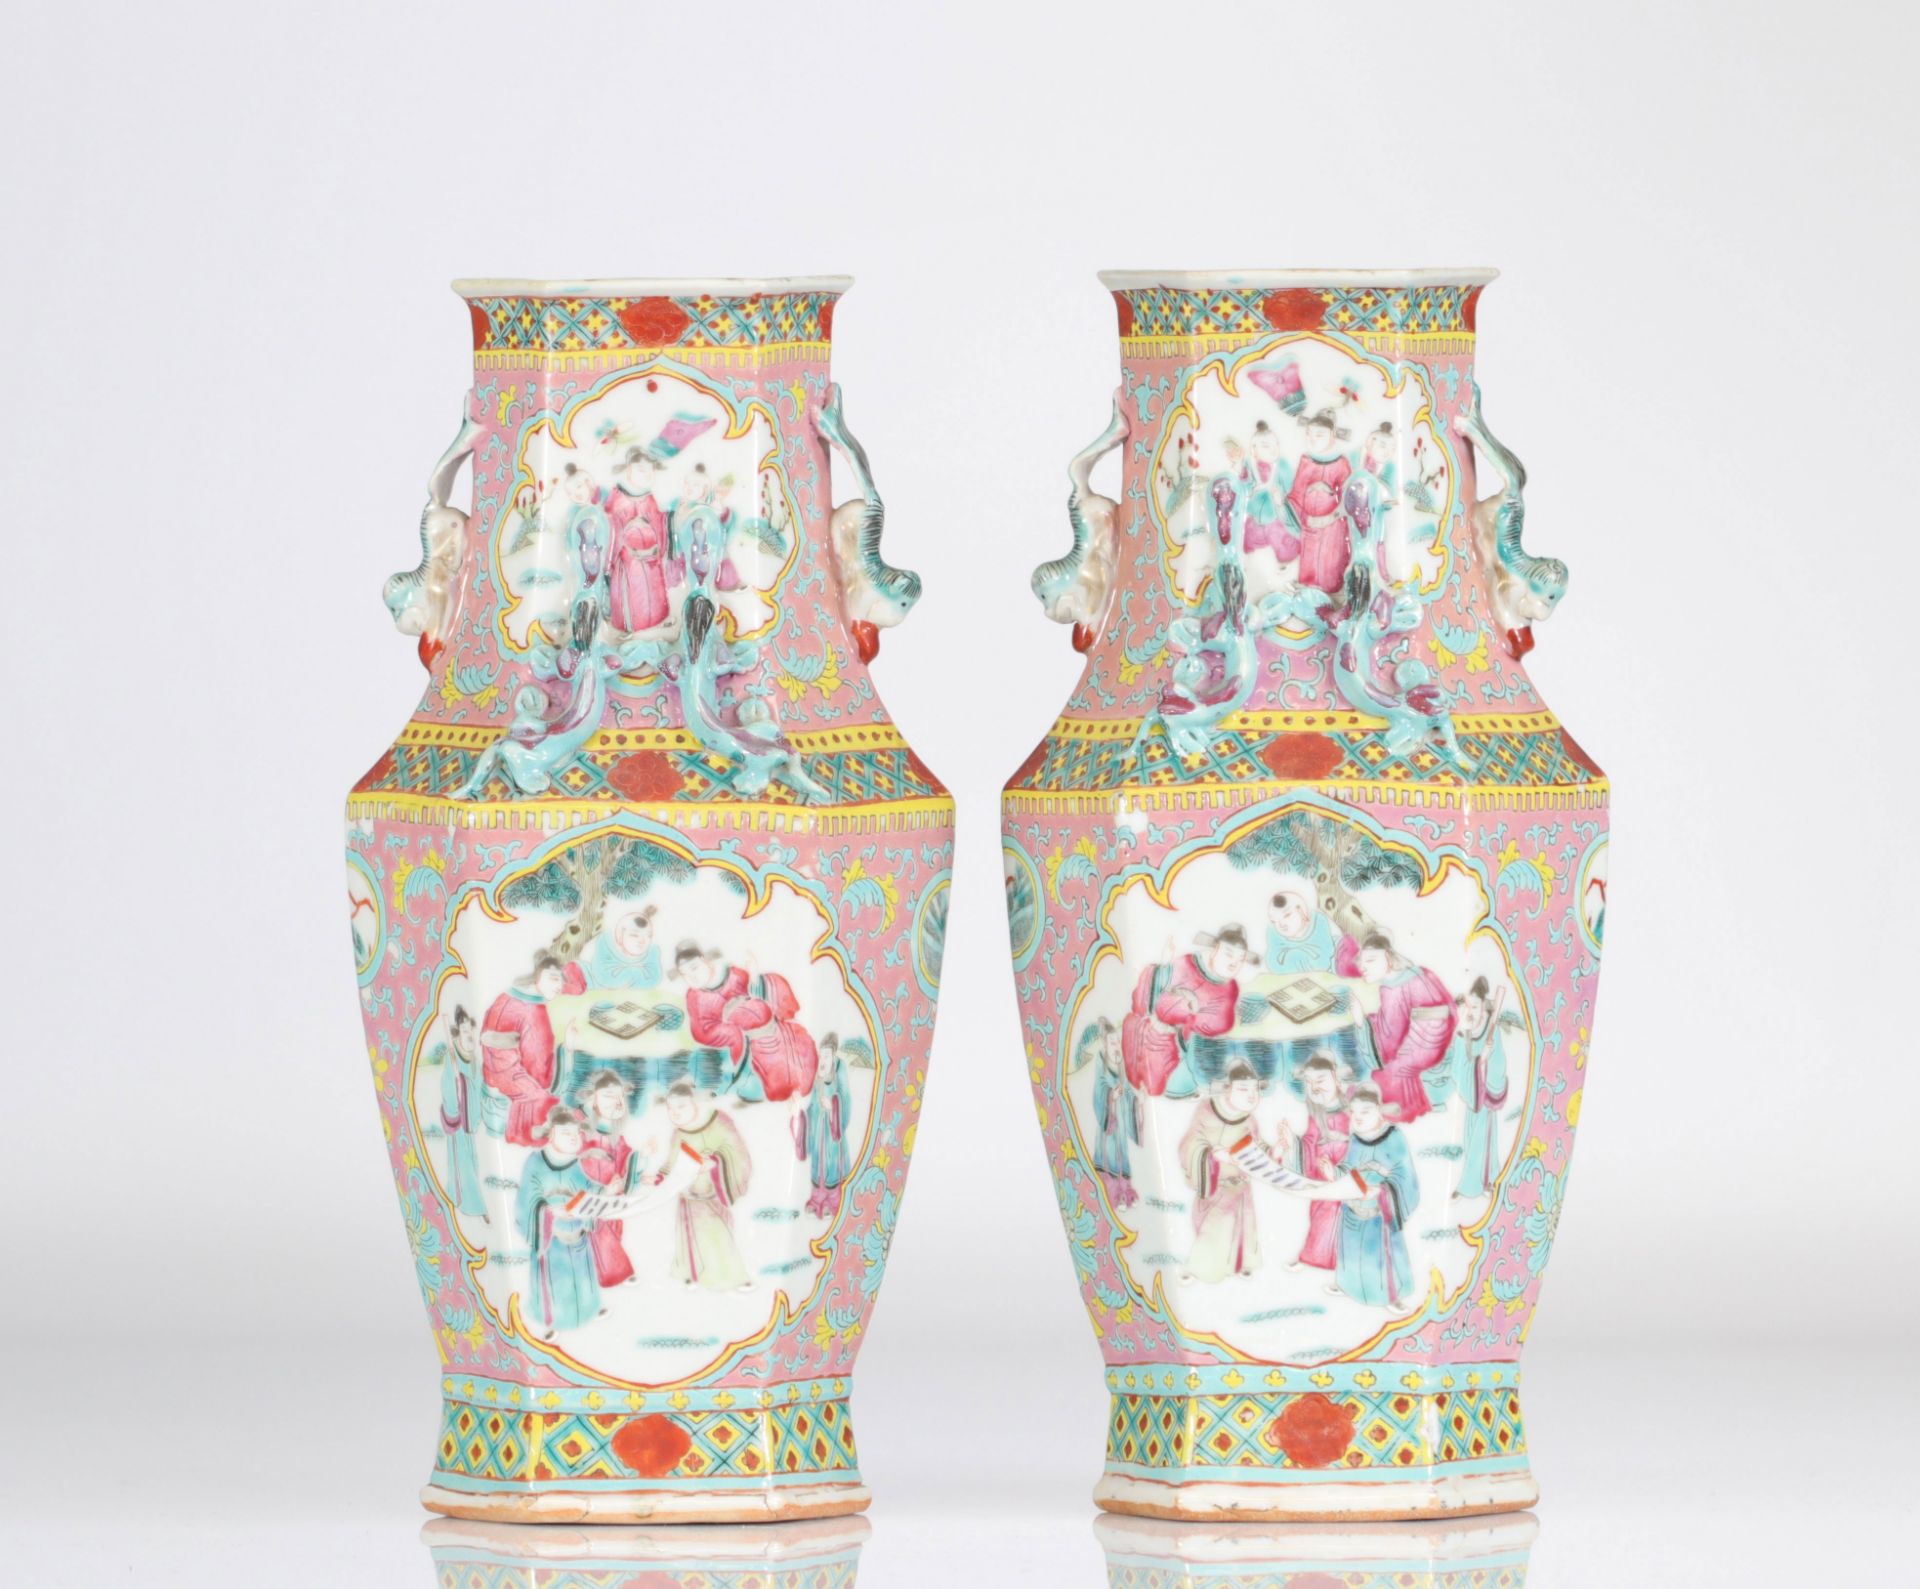 China pair of famille rose vases decorated with 19th century characters